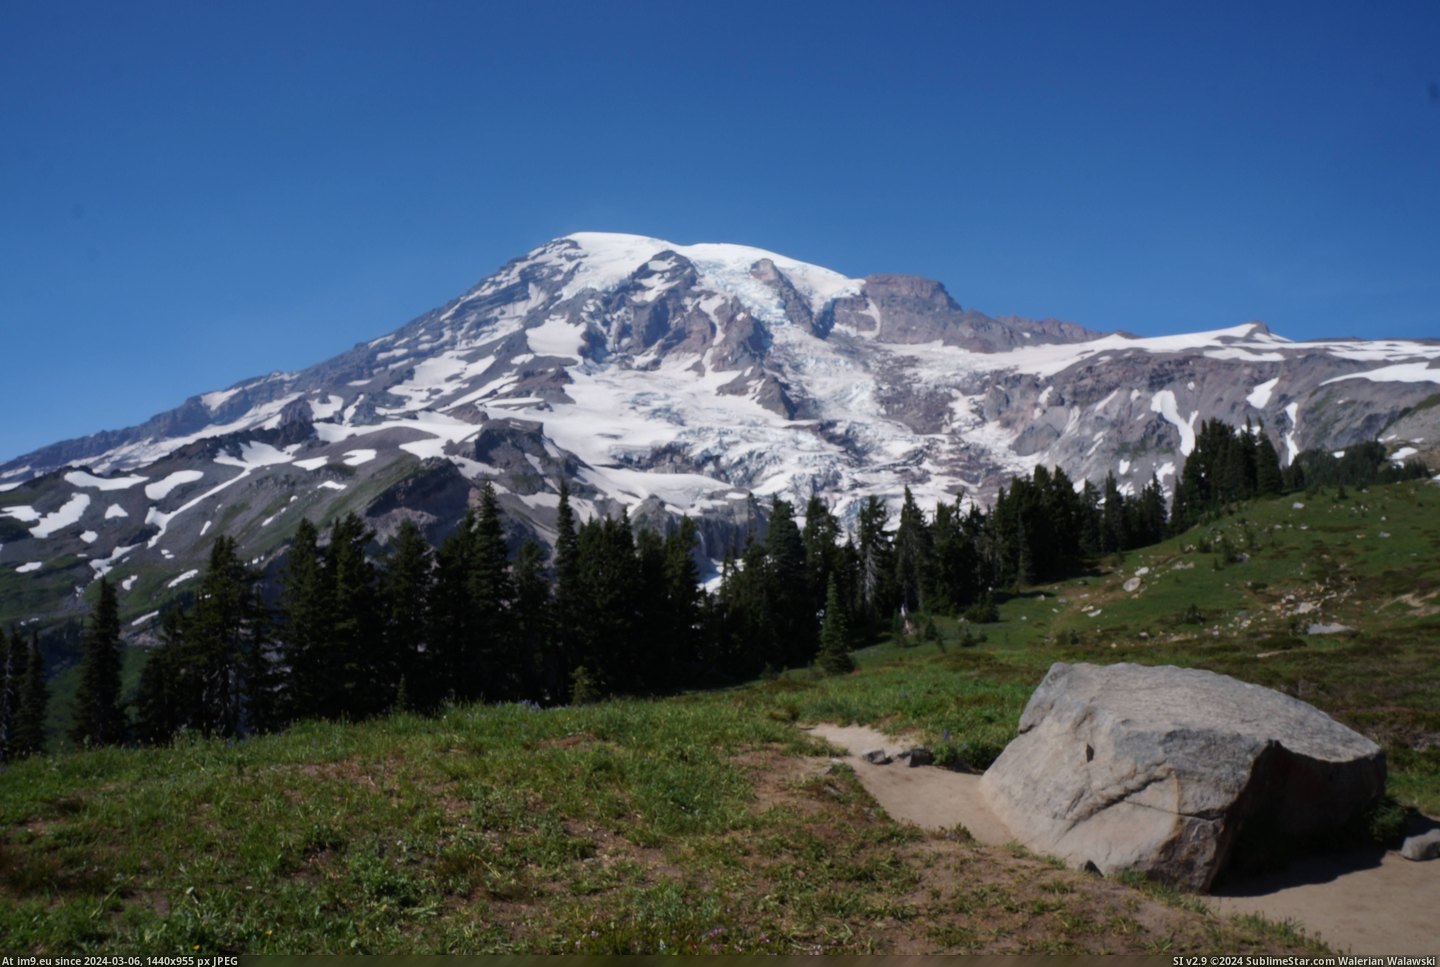 #One #Beautiful #Places #Rainier #Planet #Favorite #Mount [Earthporn] One of my favorite places on this planet, the ever so beautiful Mount Rainier. [5456x3632] Pic. (Image of album My r/EARTHPORN favs))